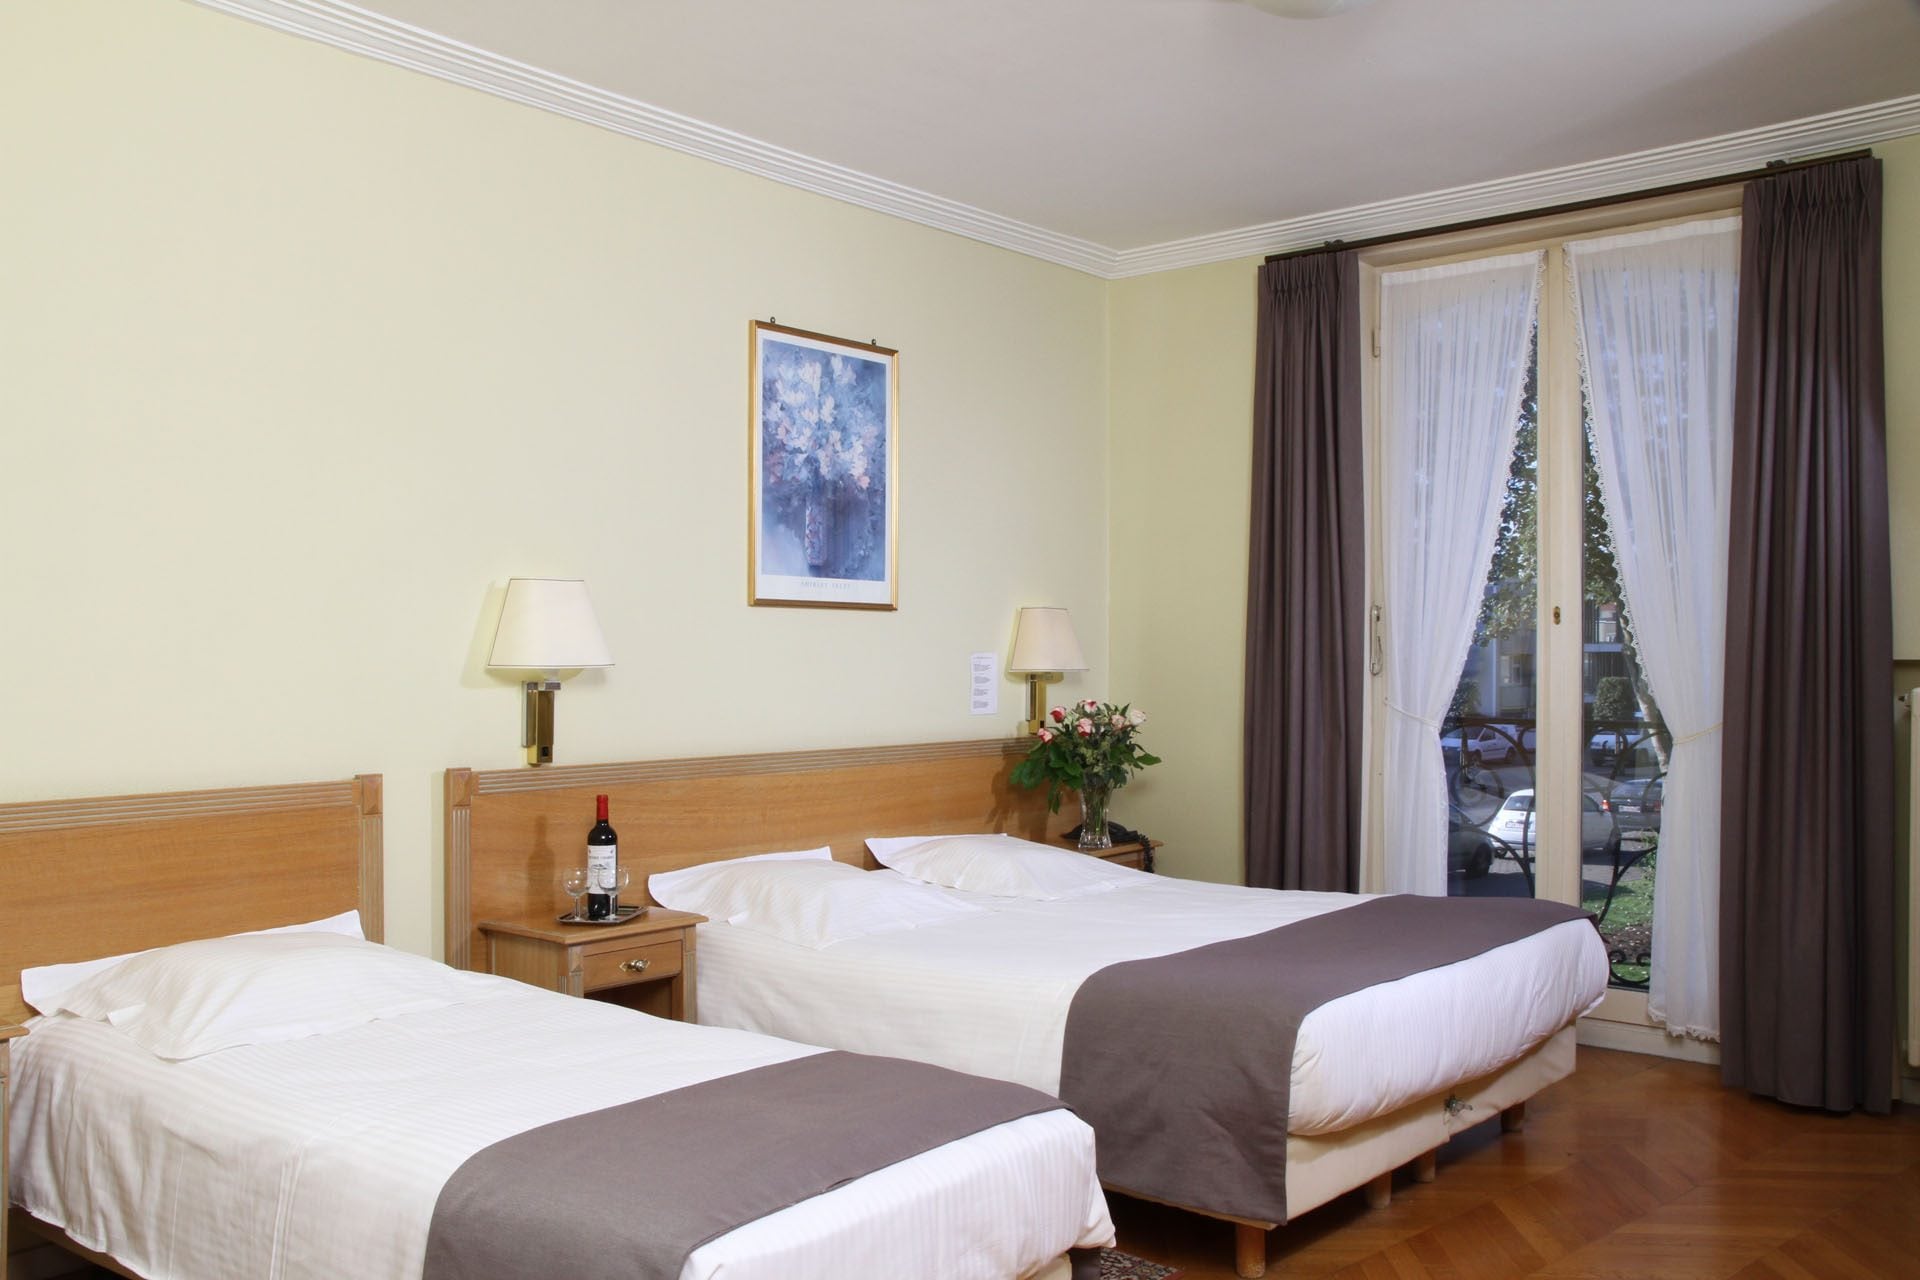 Our rooms - Sabot d'Or